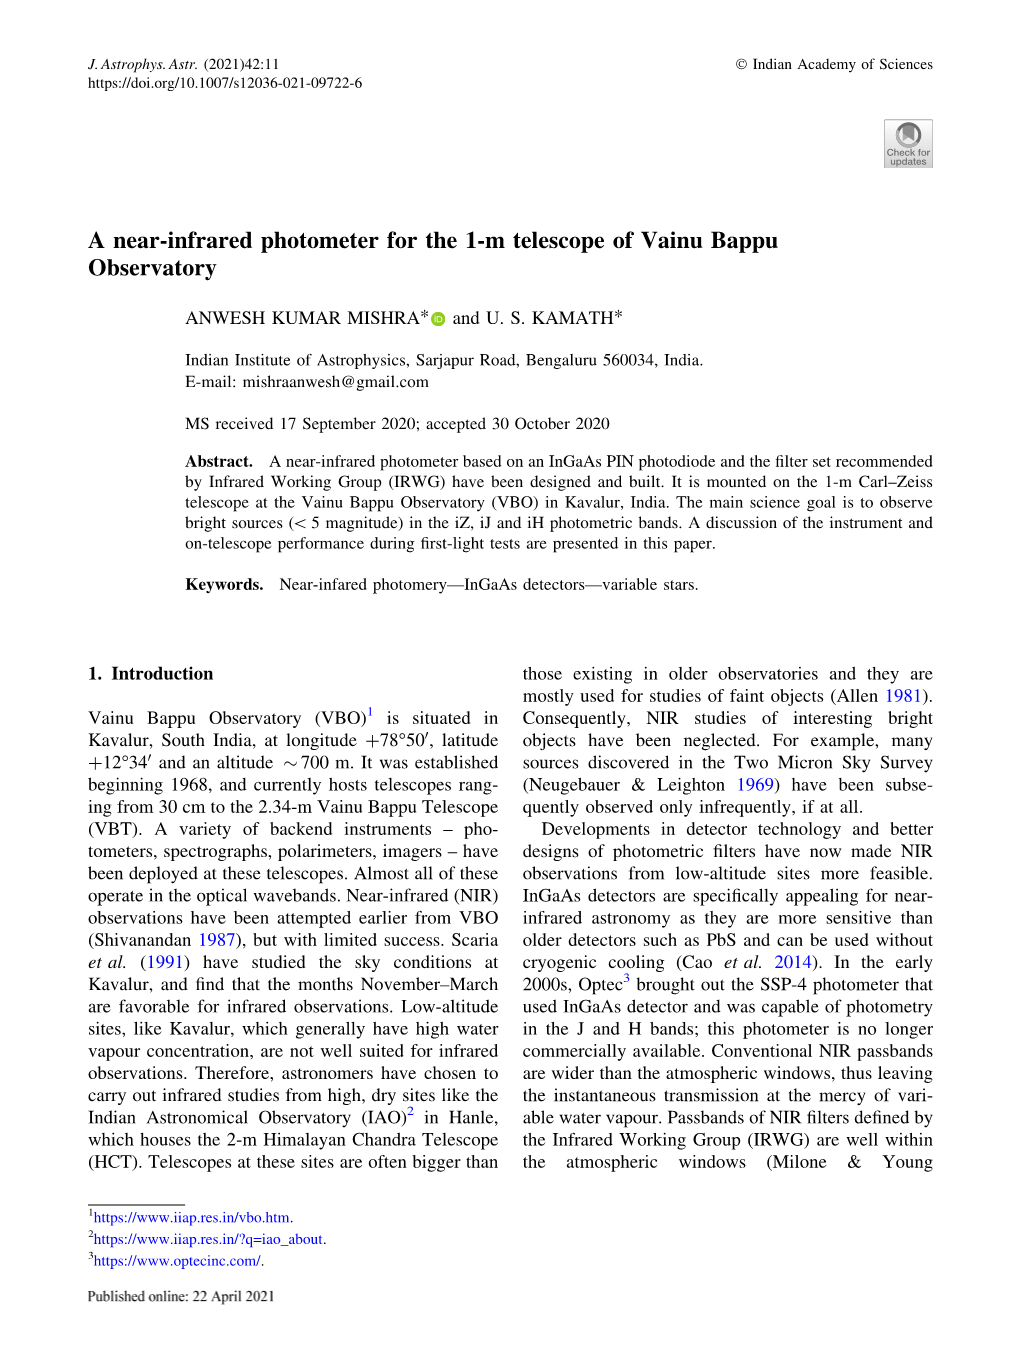 A Near-Infrared Photometer for the 1-M Telescope of Vainu Bappu Observatory